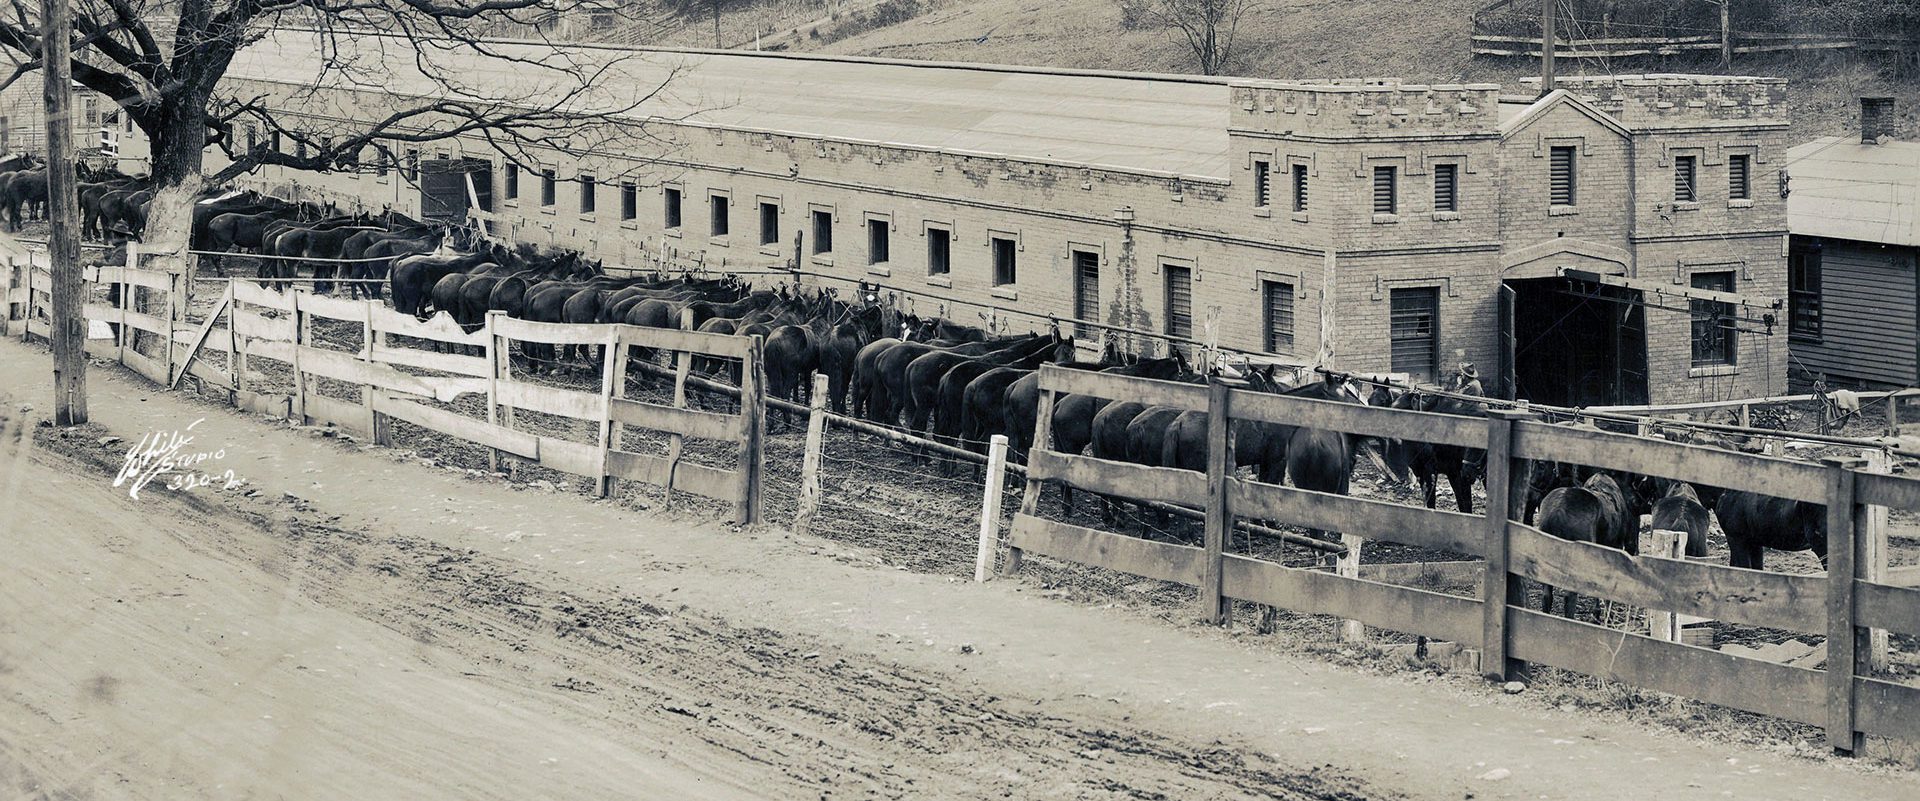 Stables from the 1920s